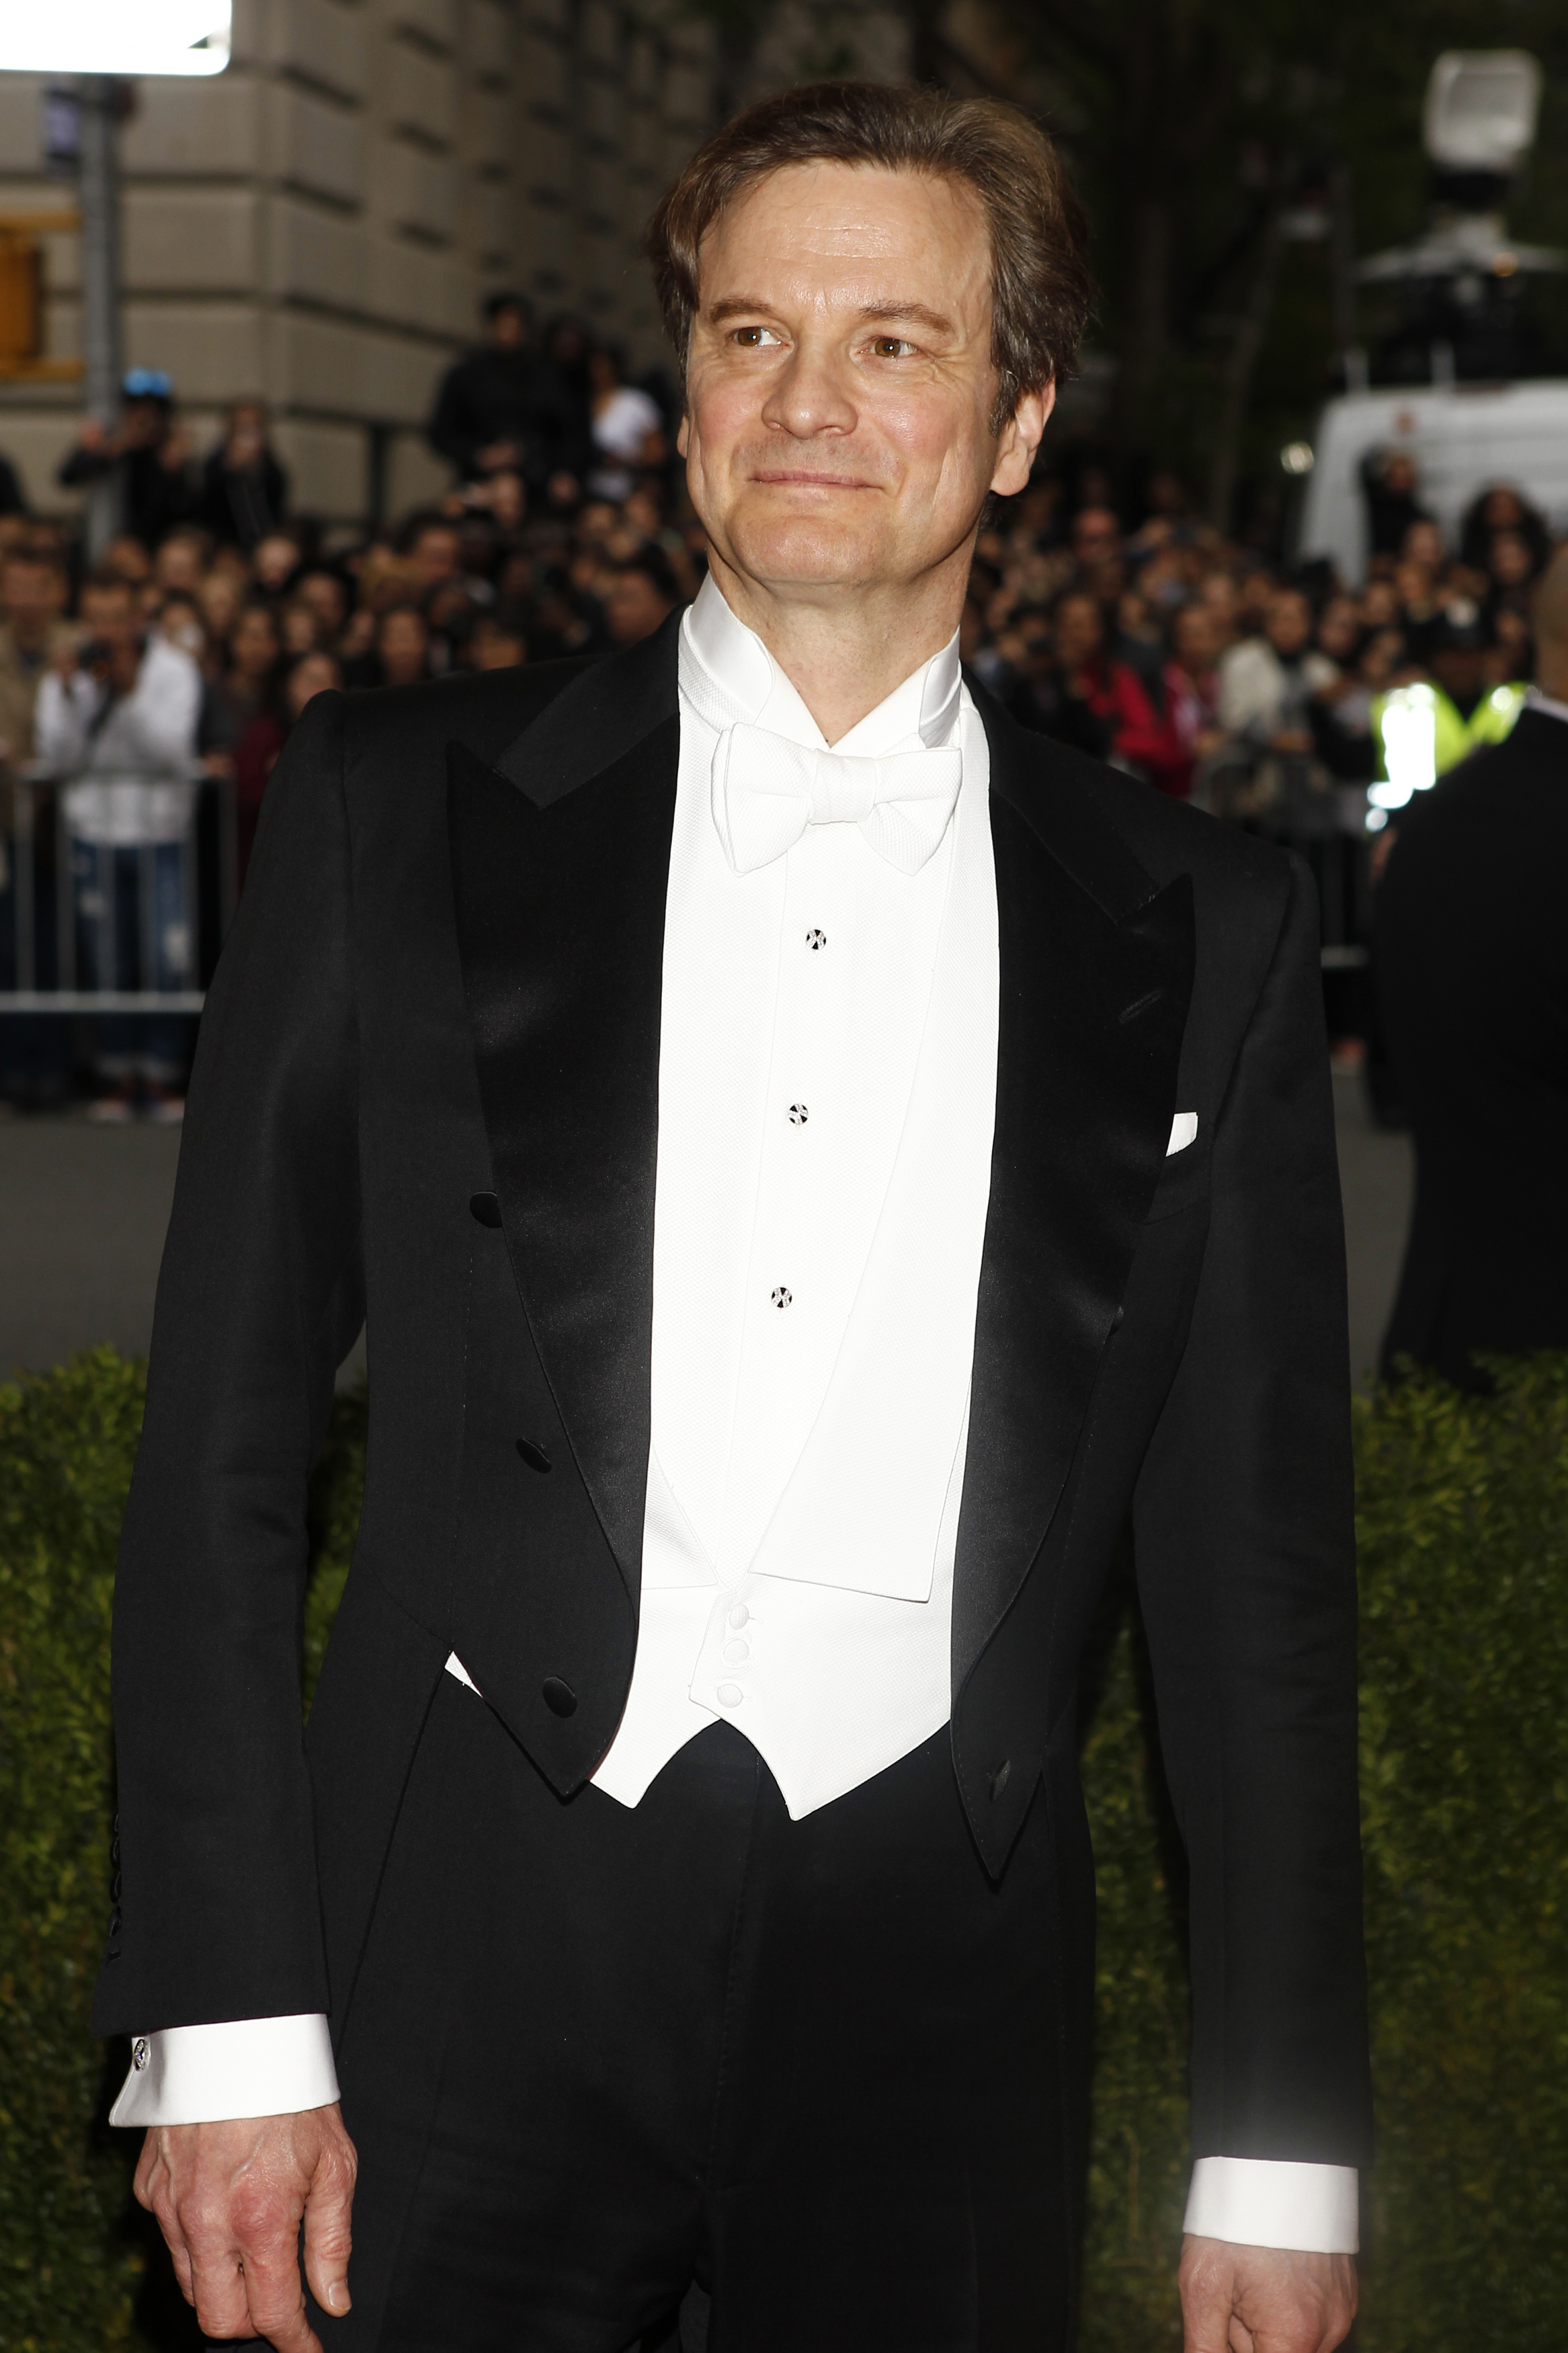 Colin Firth arrives at the Metropolitan Museum of Art Costume Institute Gala Benefit in New York